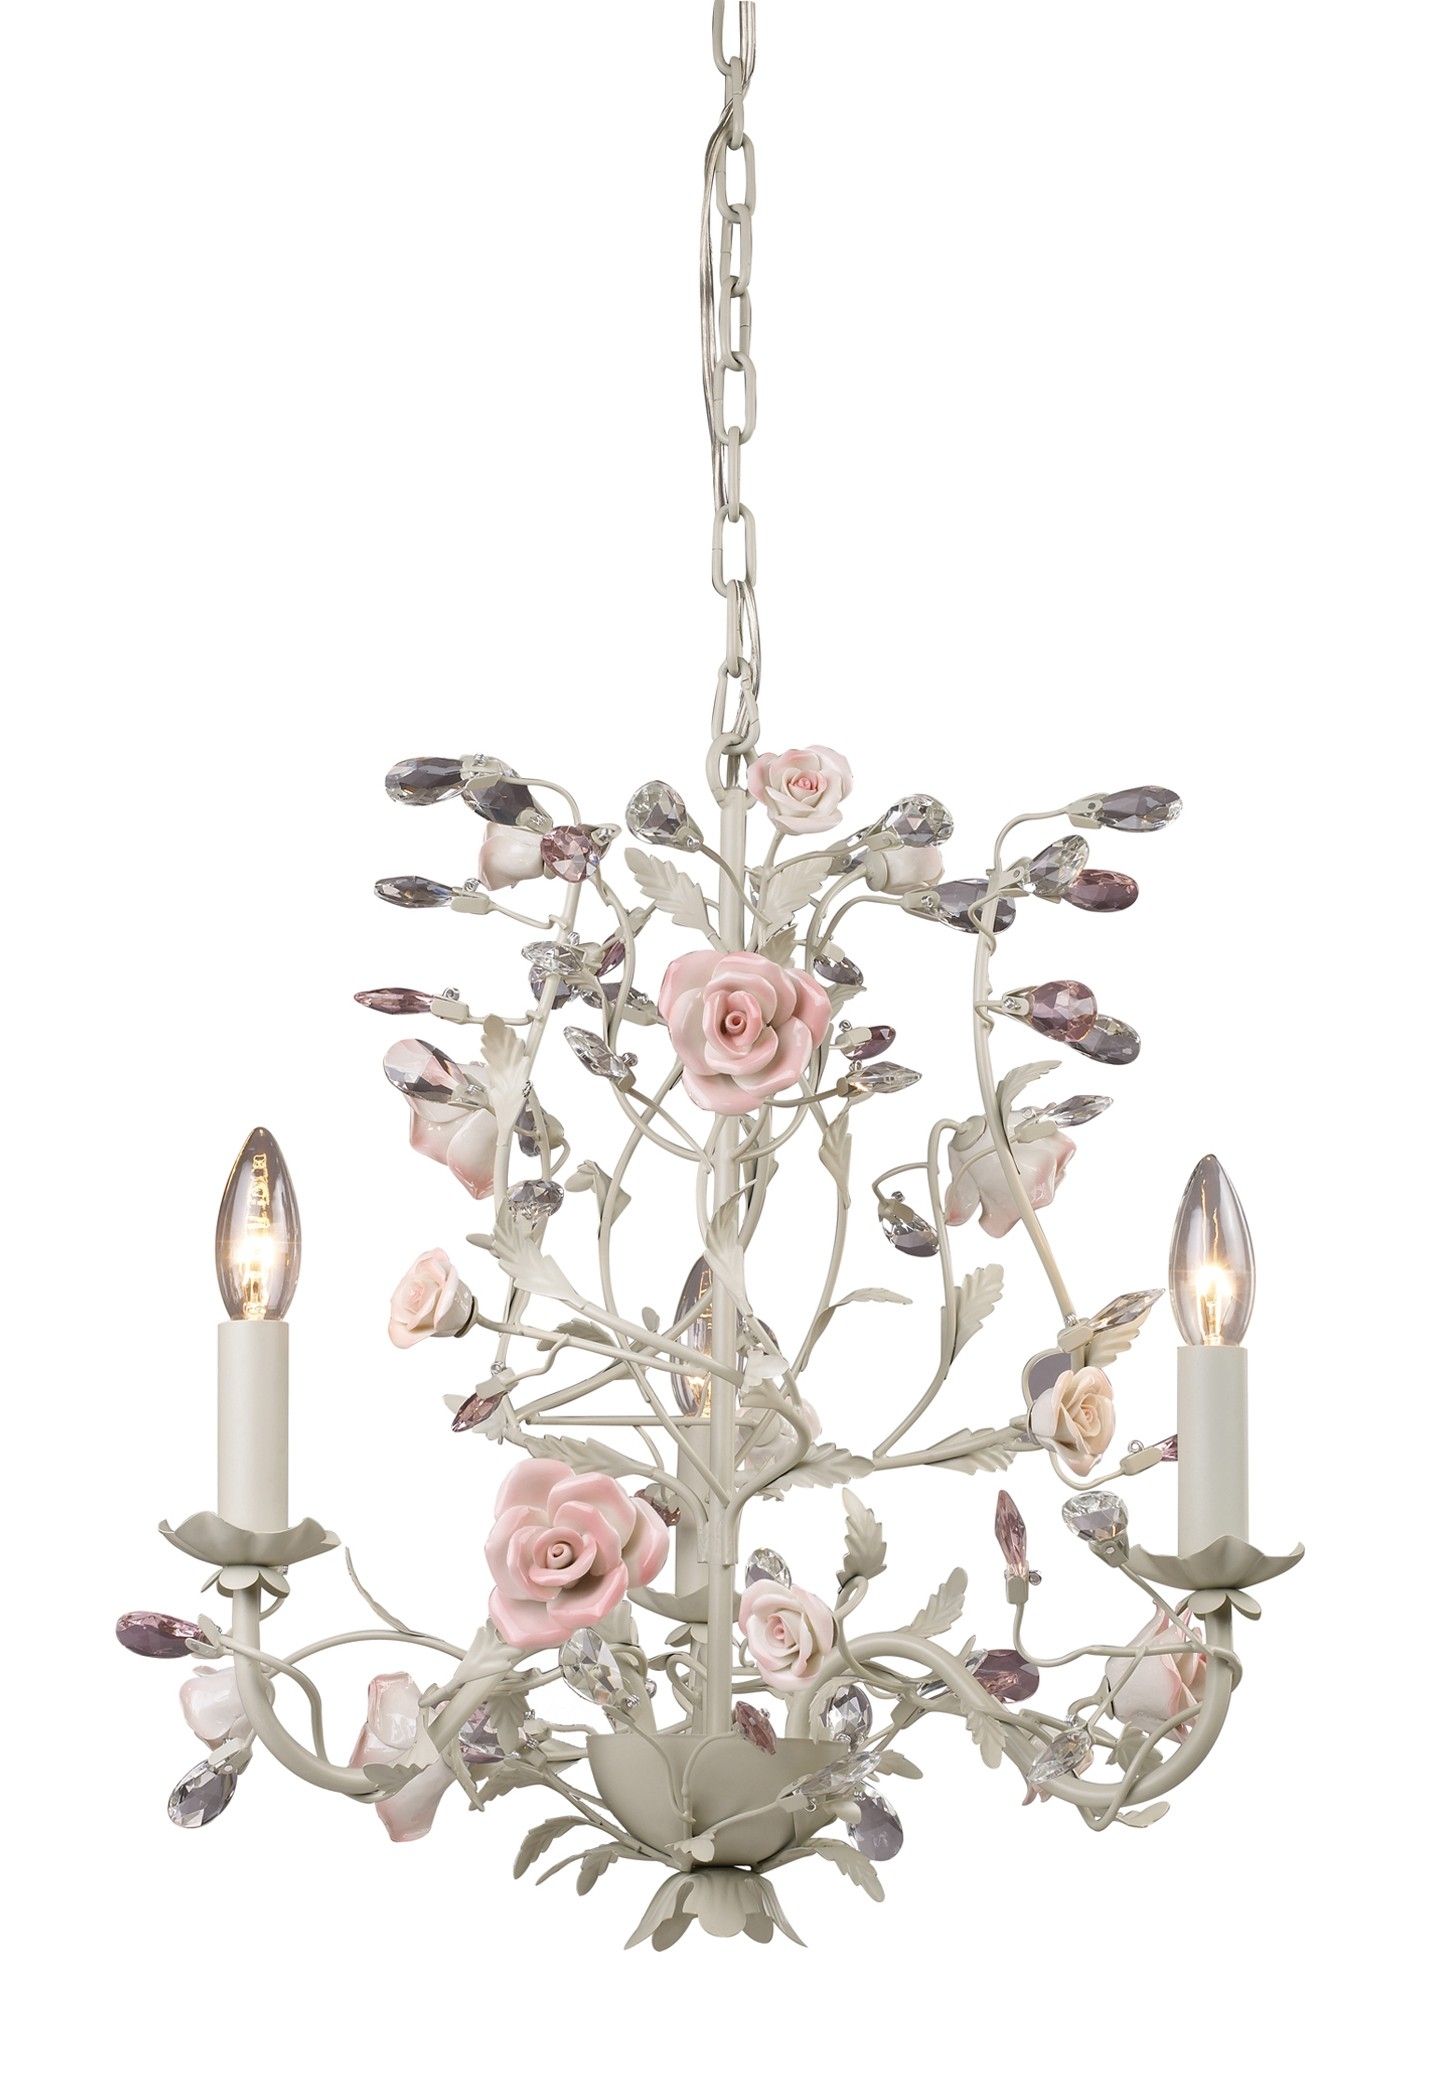 Light Flower Chandelier Would Love This For My Office Regarding Shabby Chic Chandeliers (Photo 3 of 12)